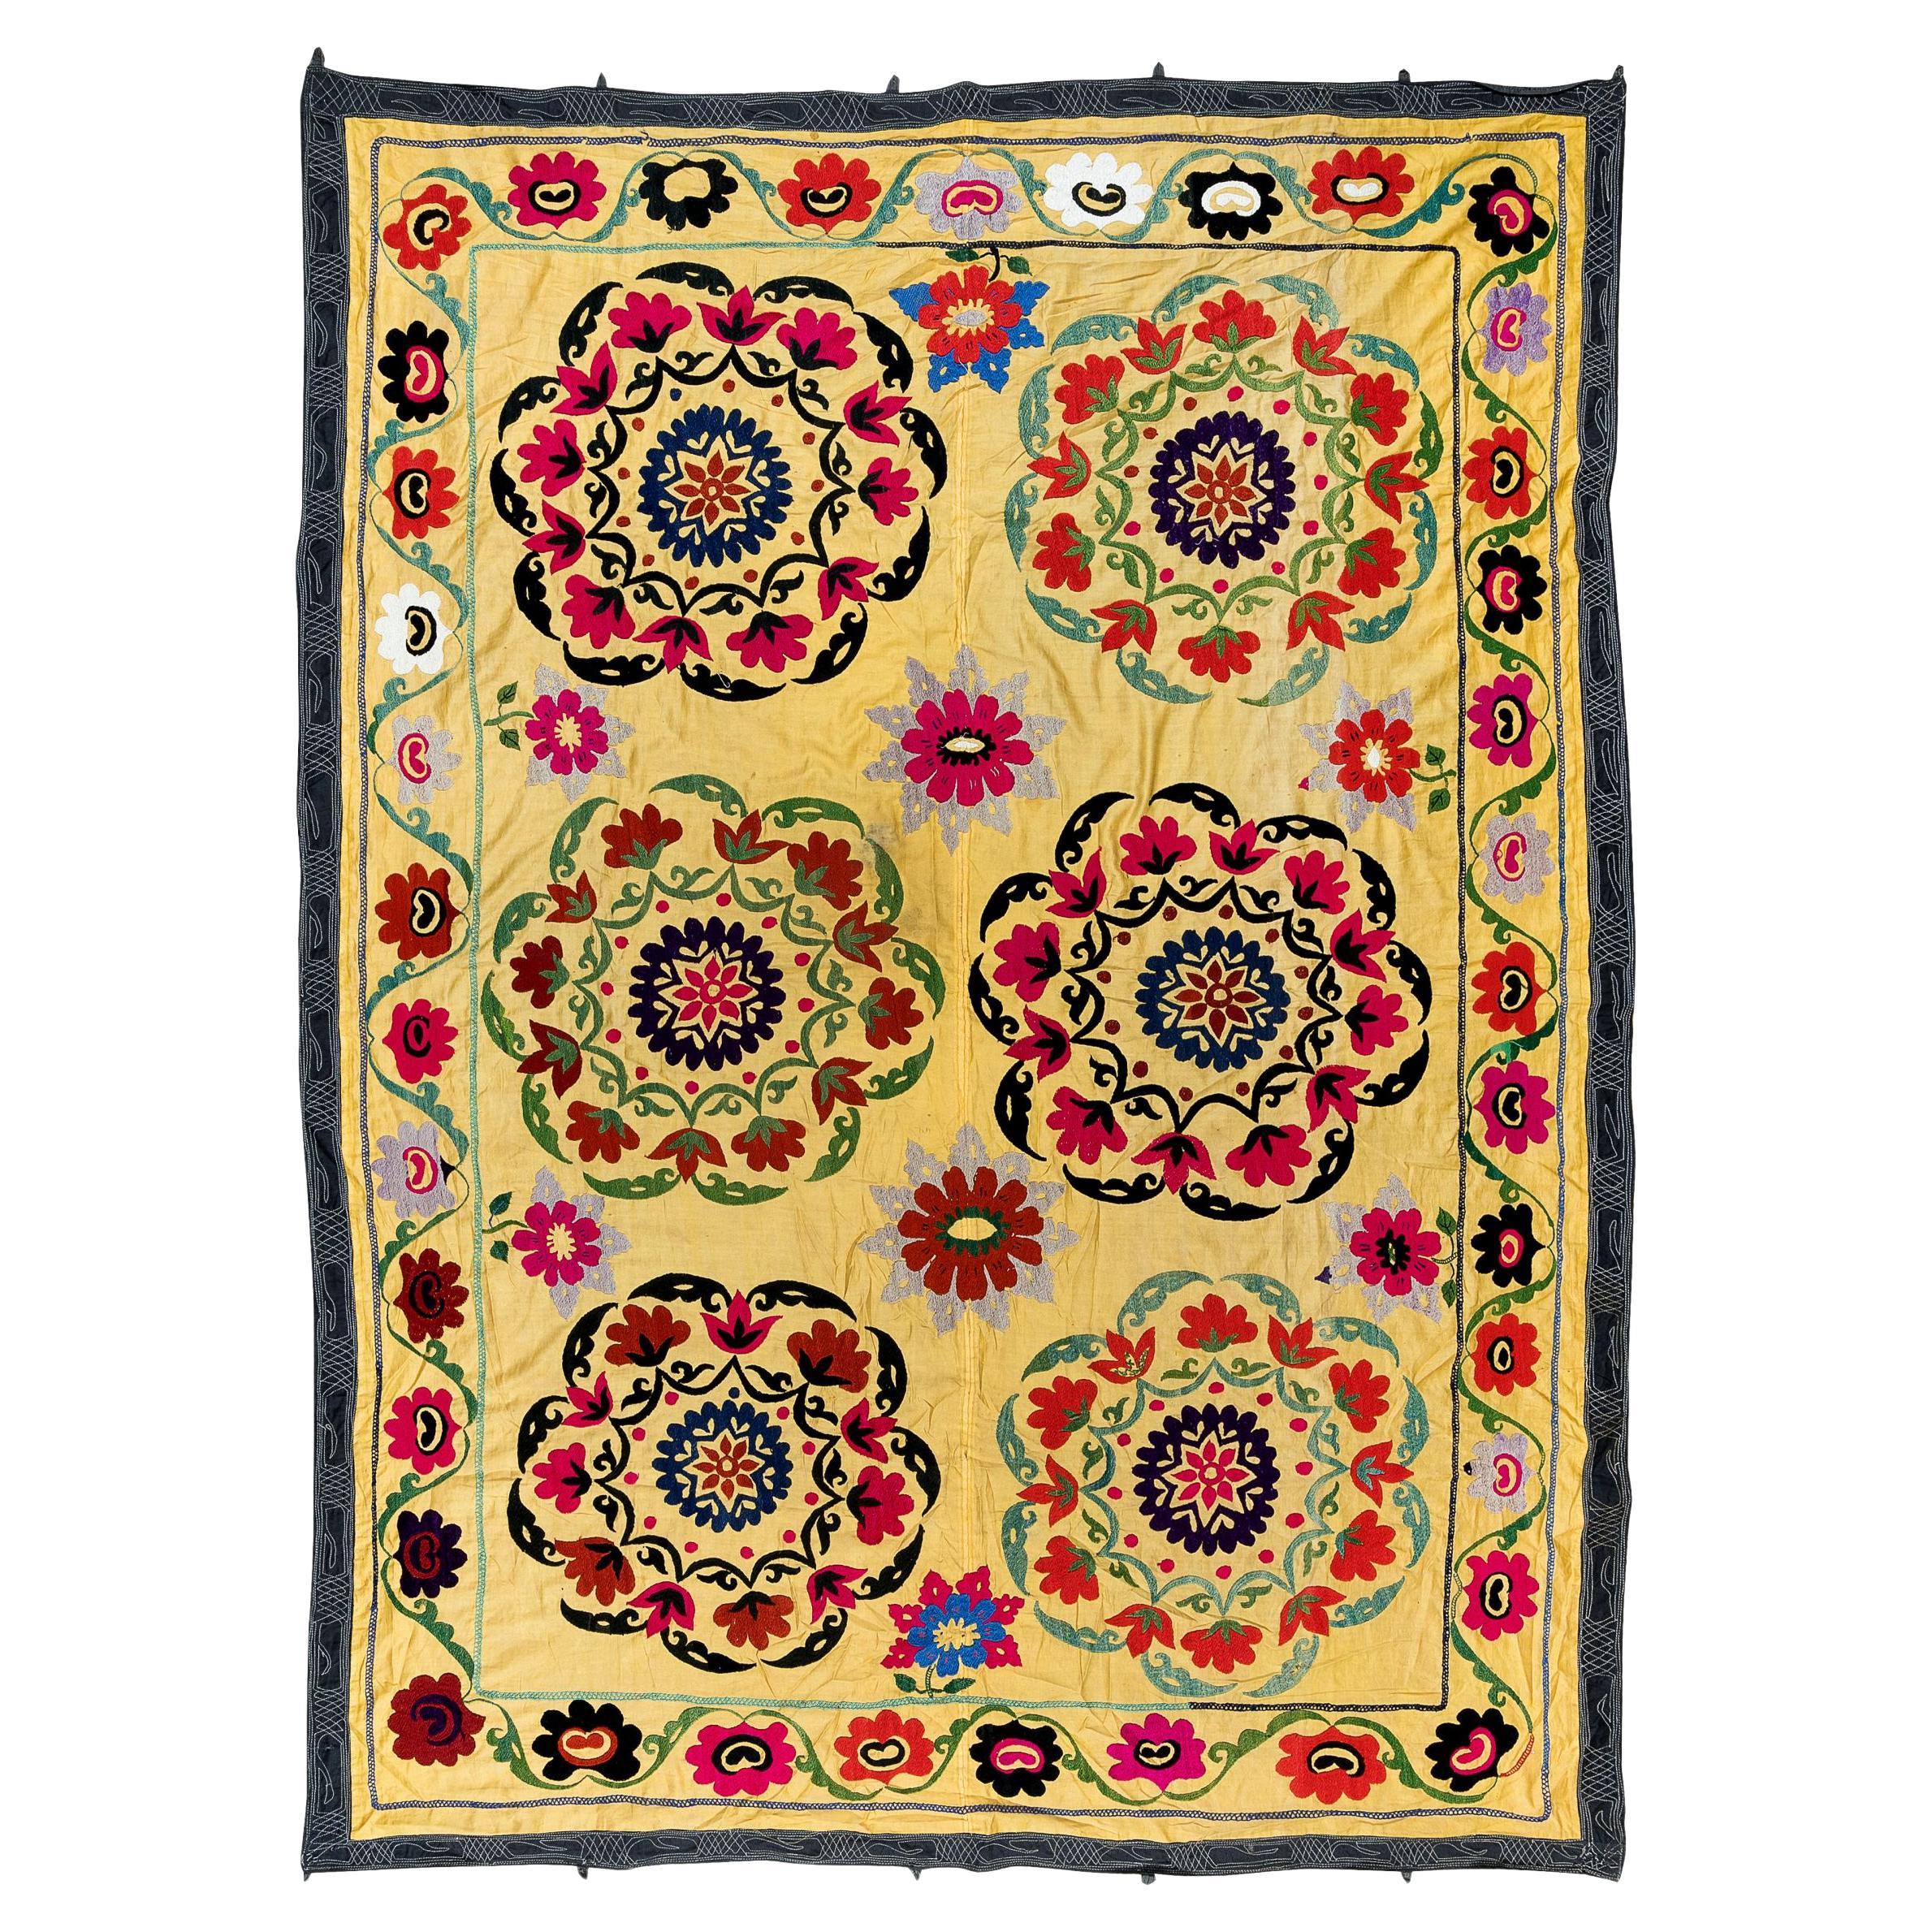 5x7.3 Ft Silk Embroidery Bed Cover, Uzbek Suzani Wall Hanging in Yellow